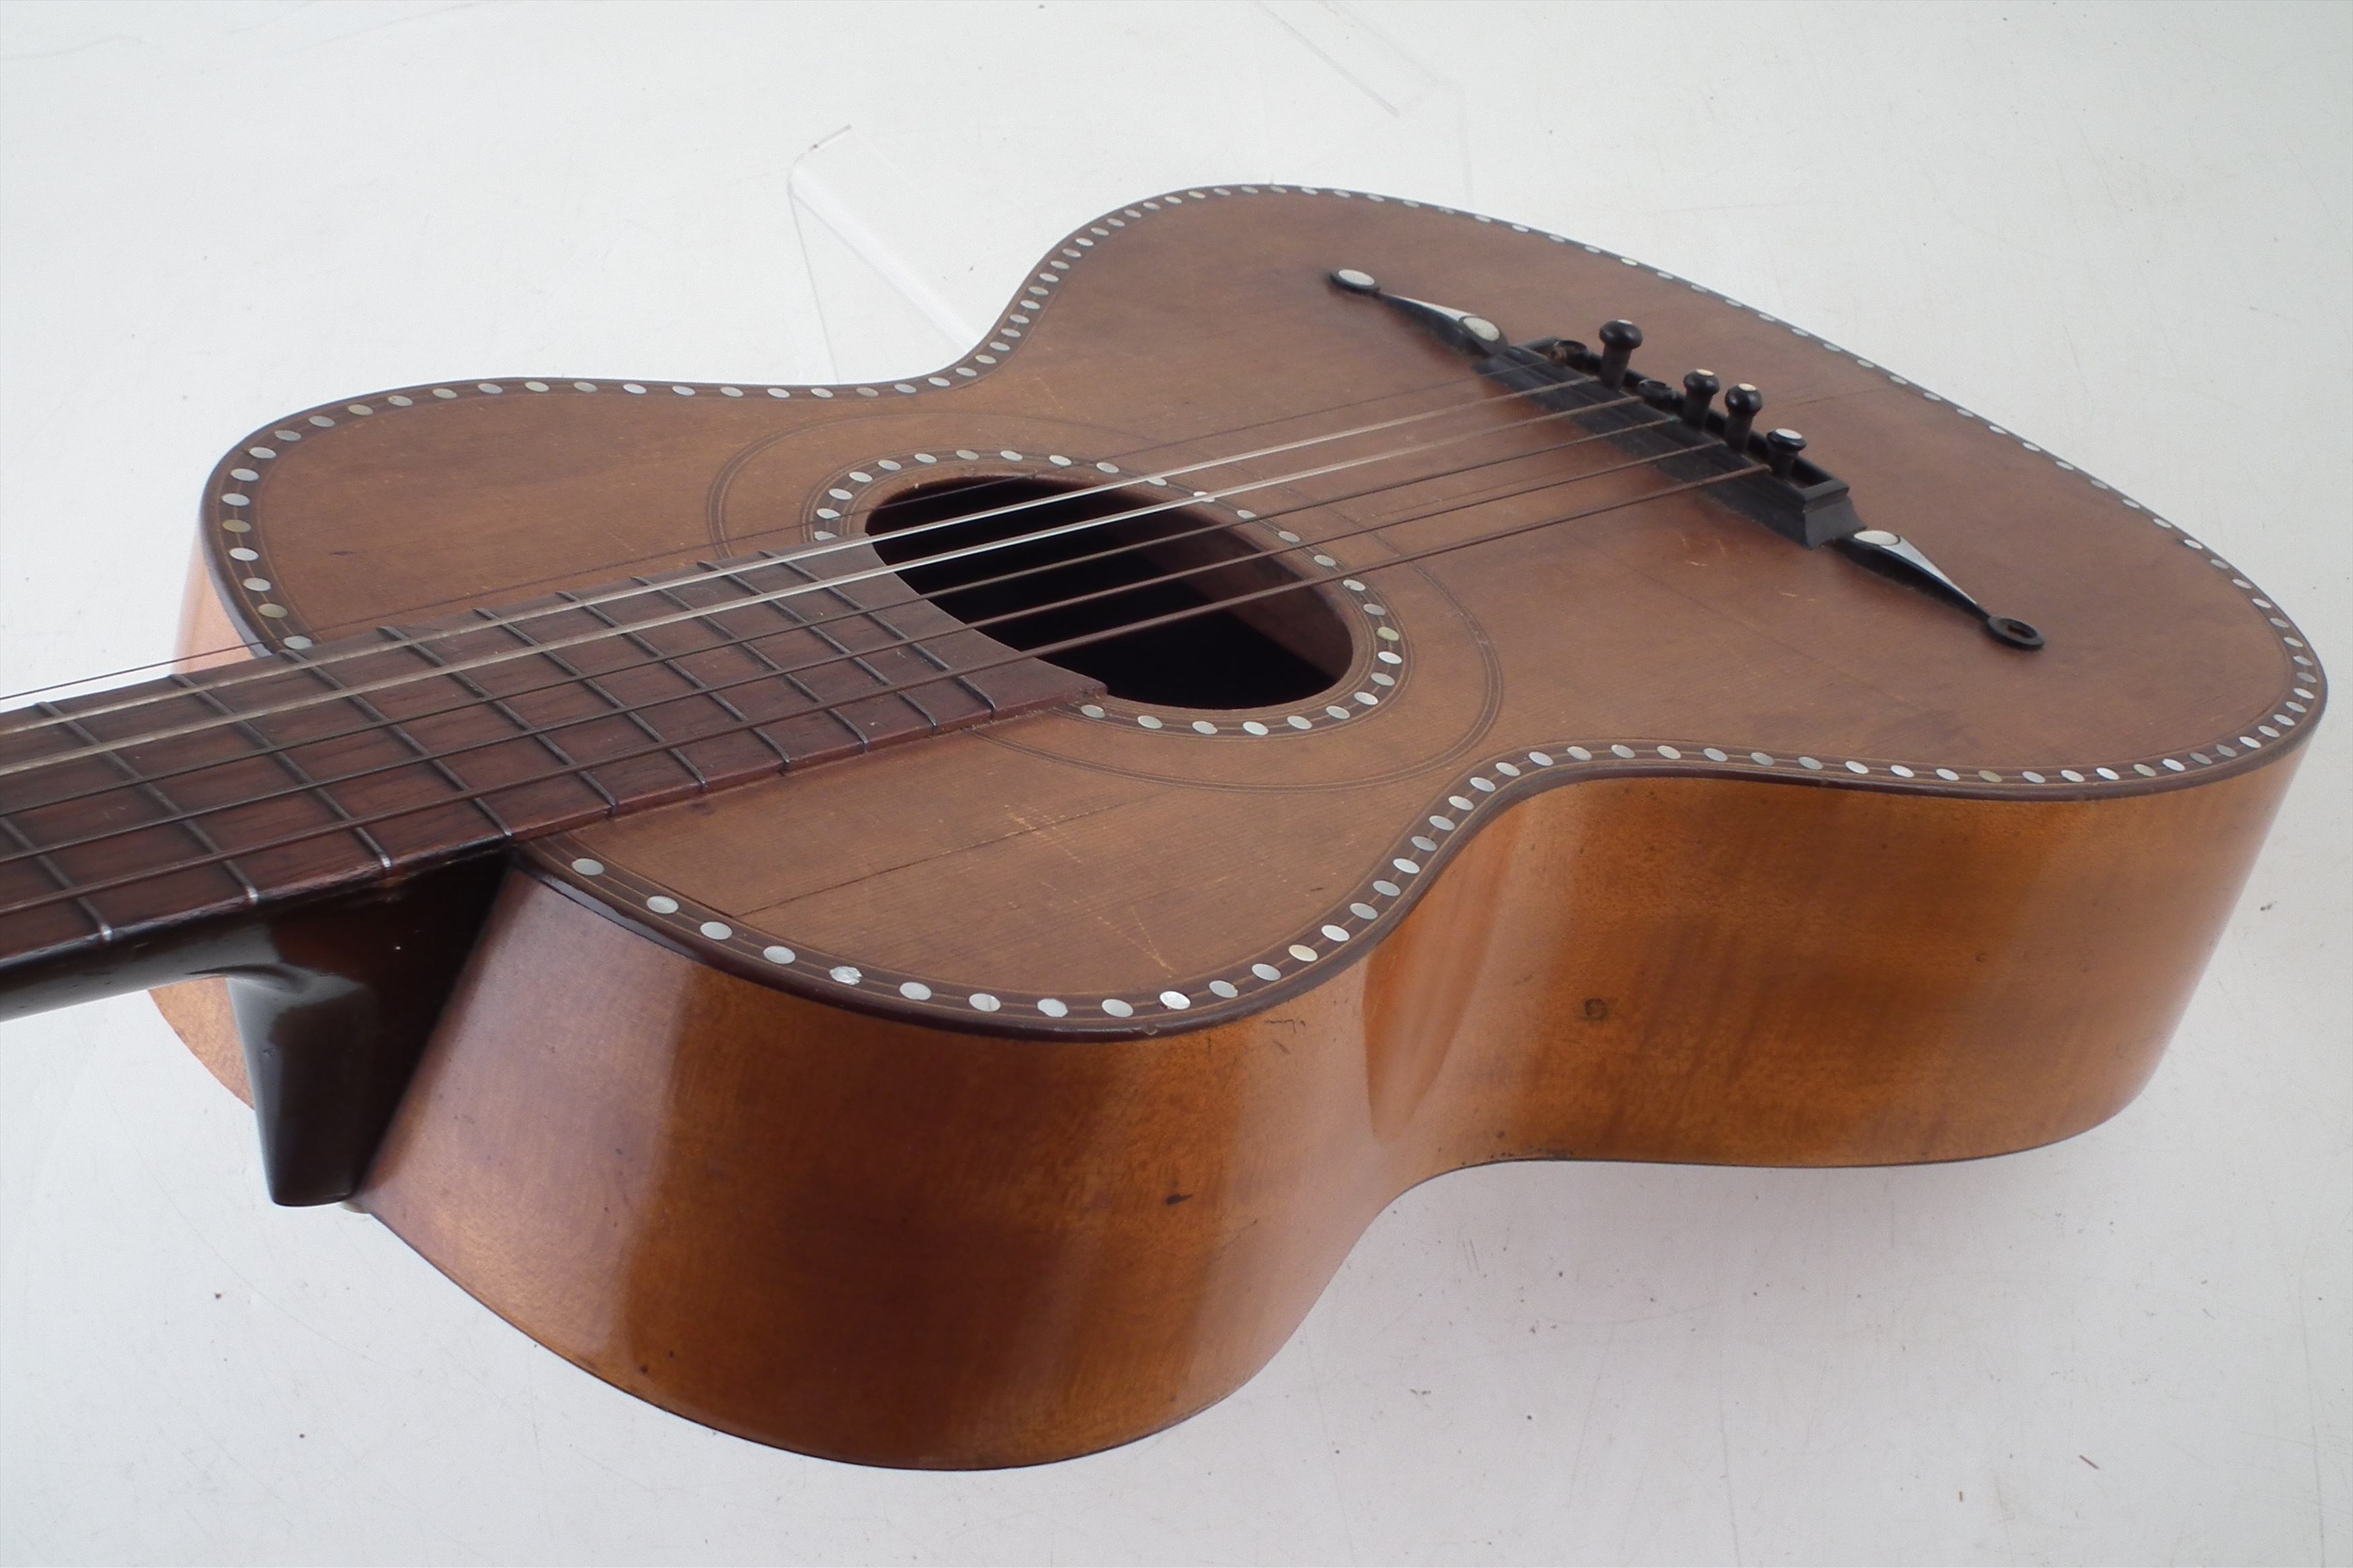 Panormo guitar in case - Image 5 of 19